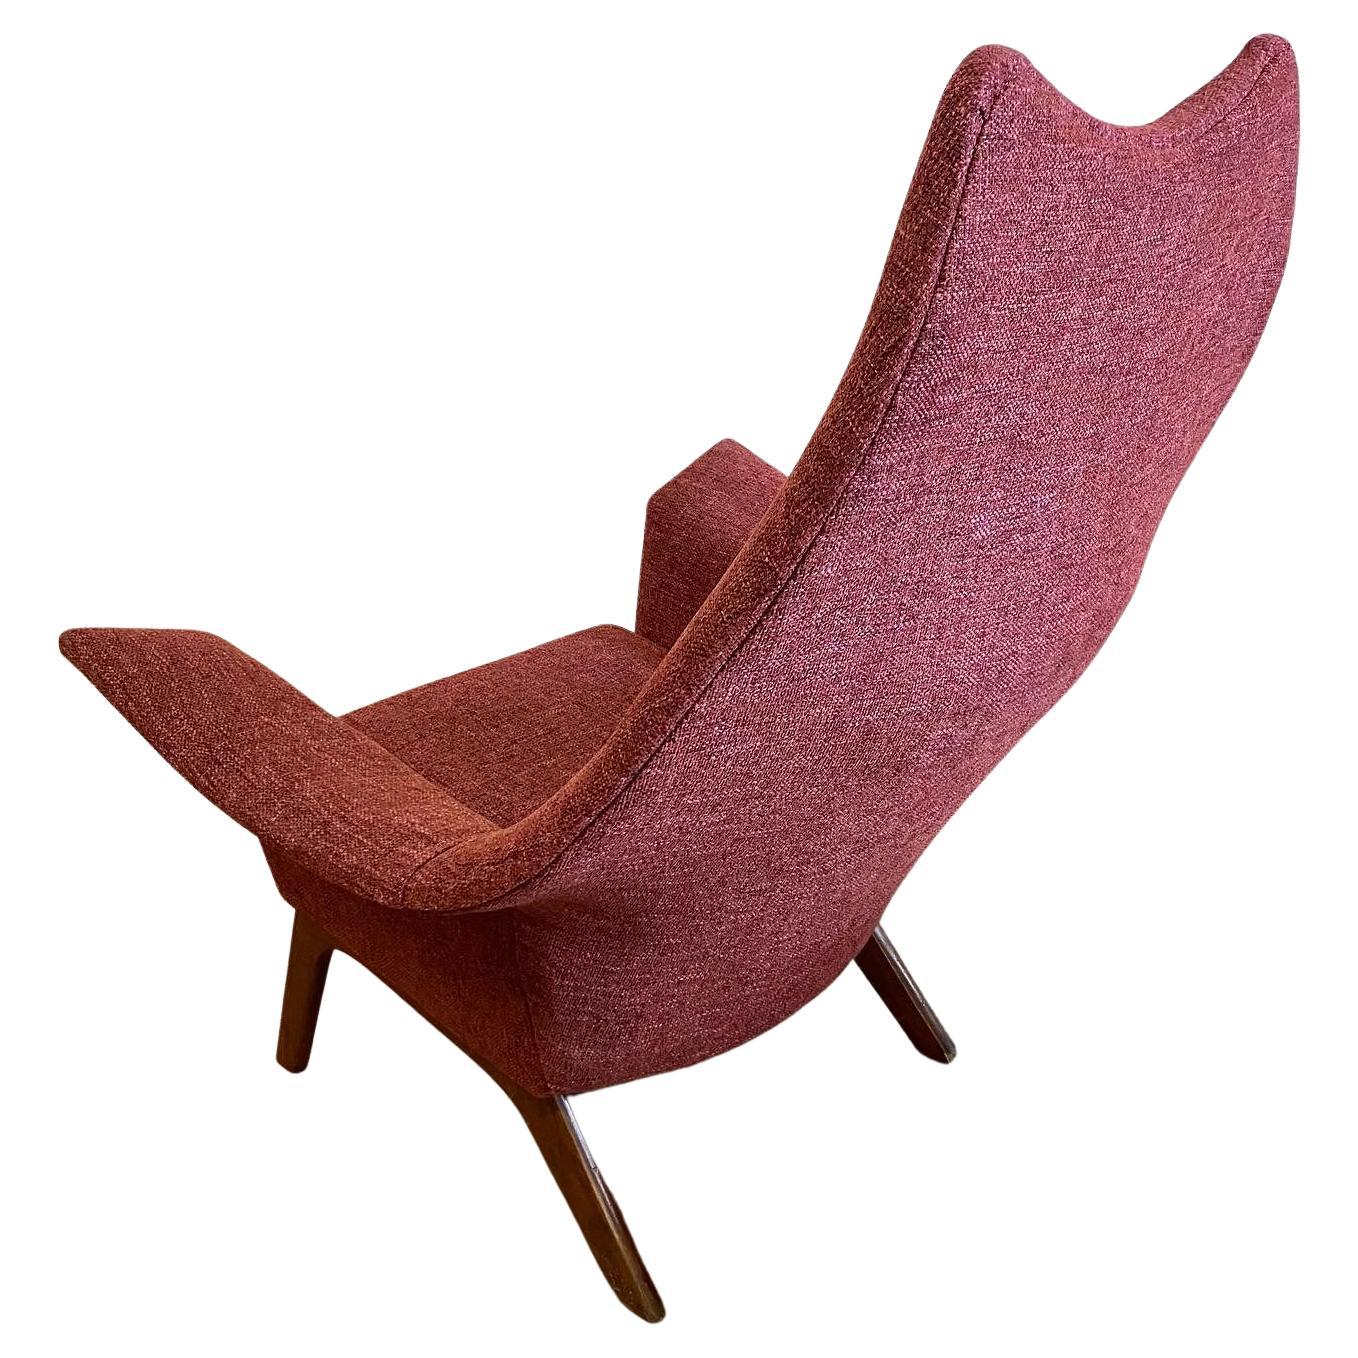 Classic Modernist Adrian Pearsall Sculptural Lounge Chair